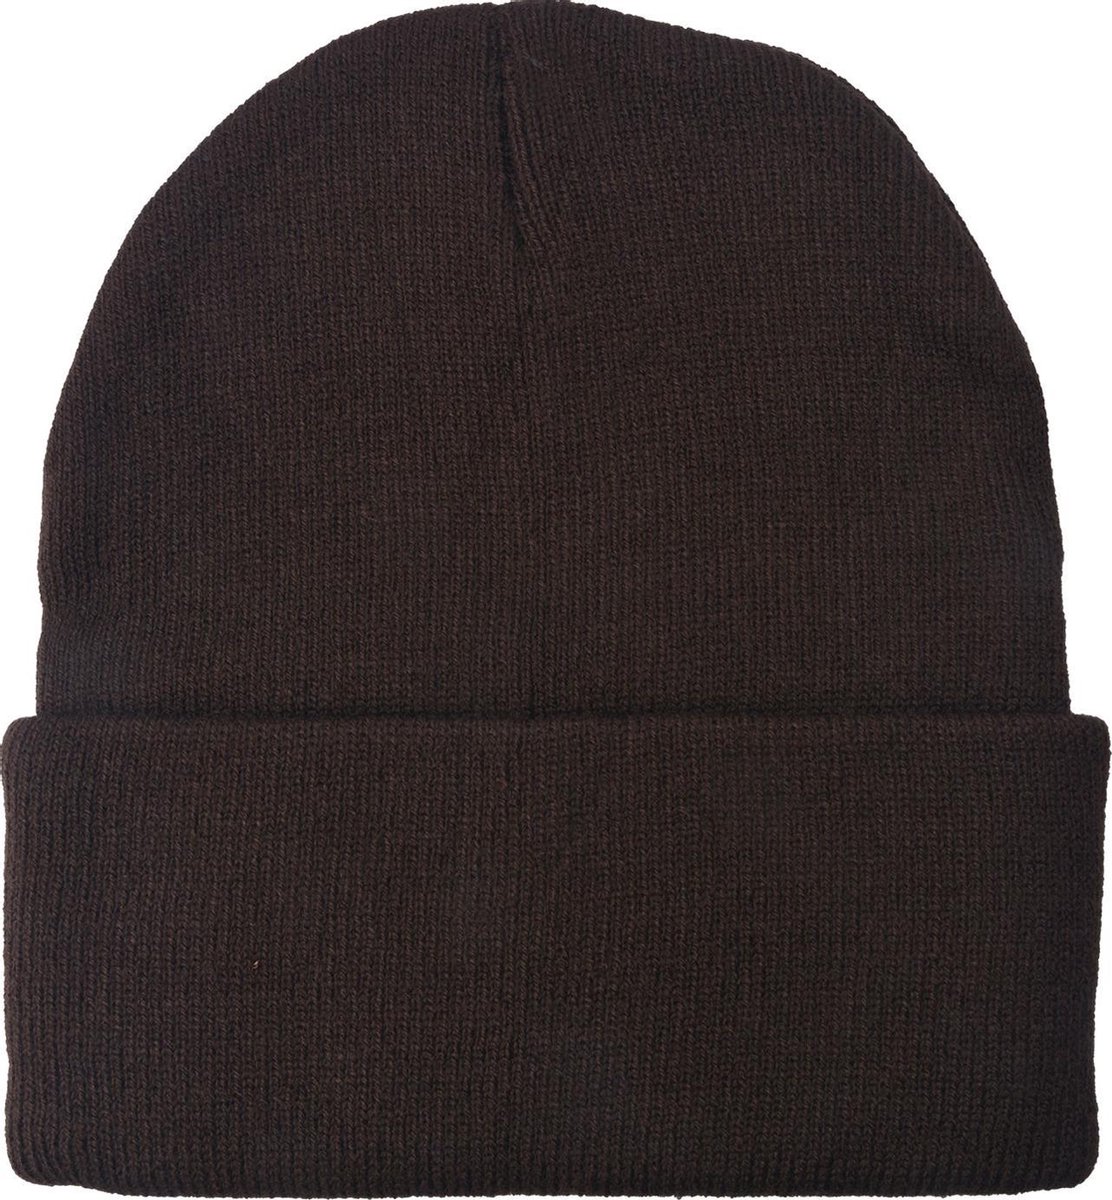 Muts | Beanie | 100% Acryl | Bruin | One Size | Wintersport | Outdoor |